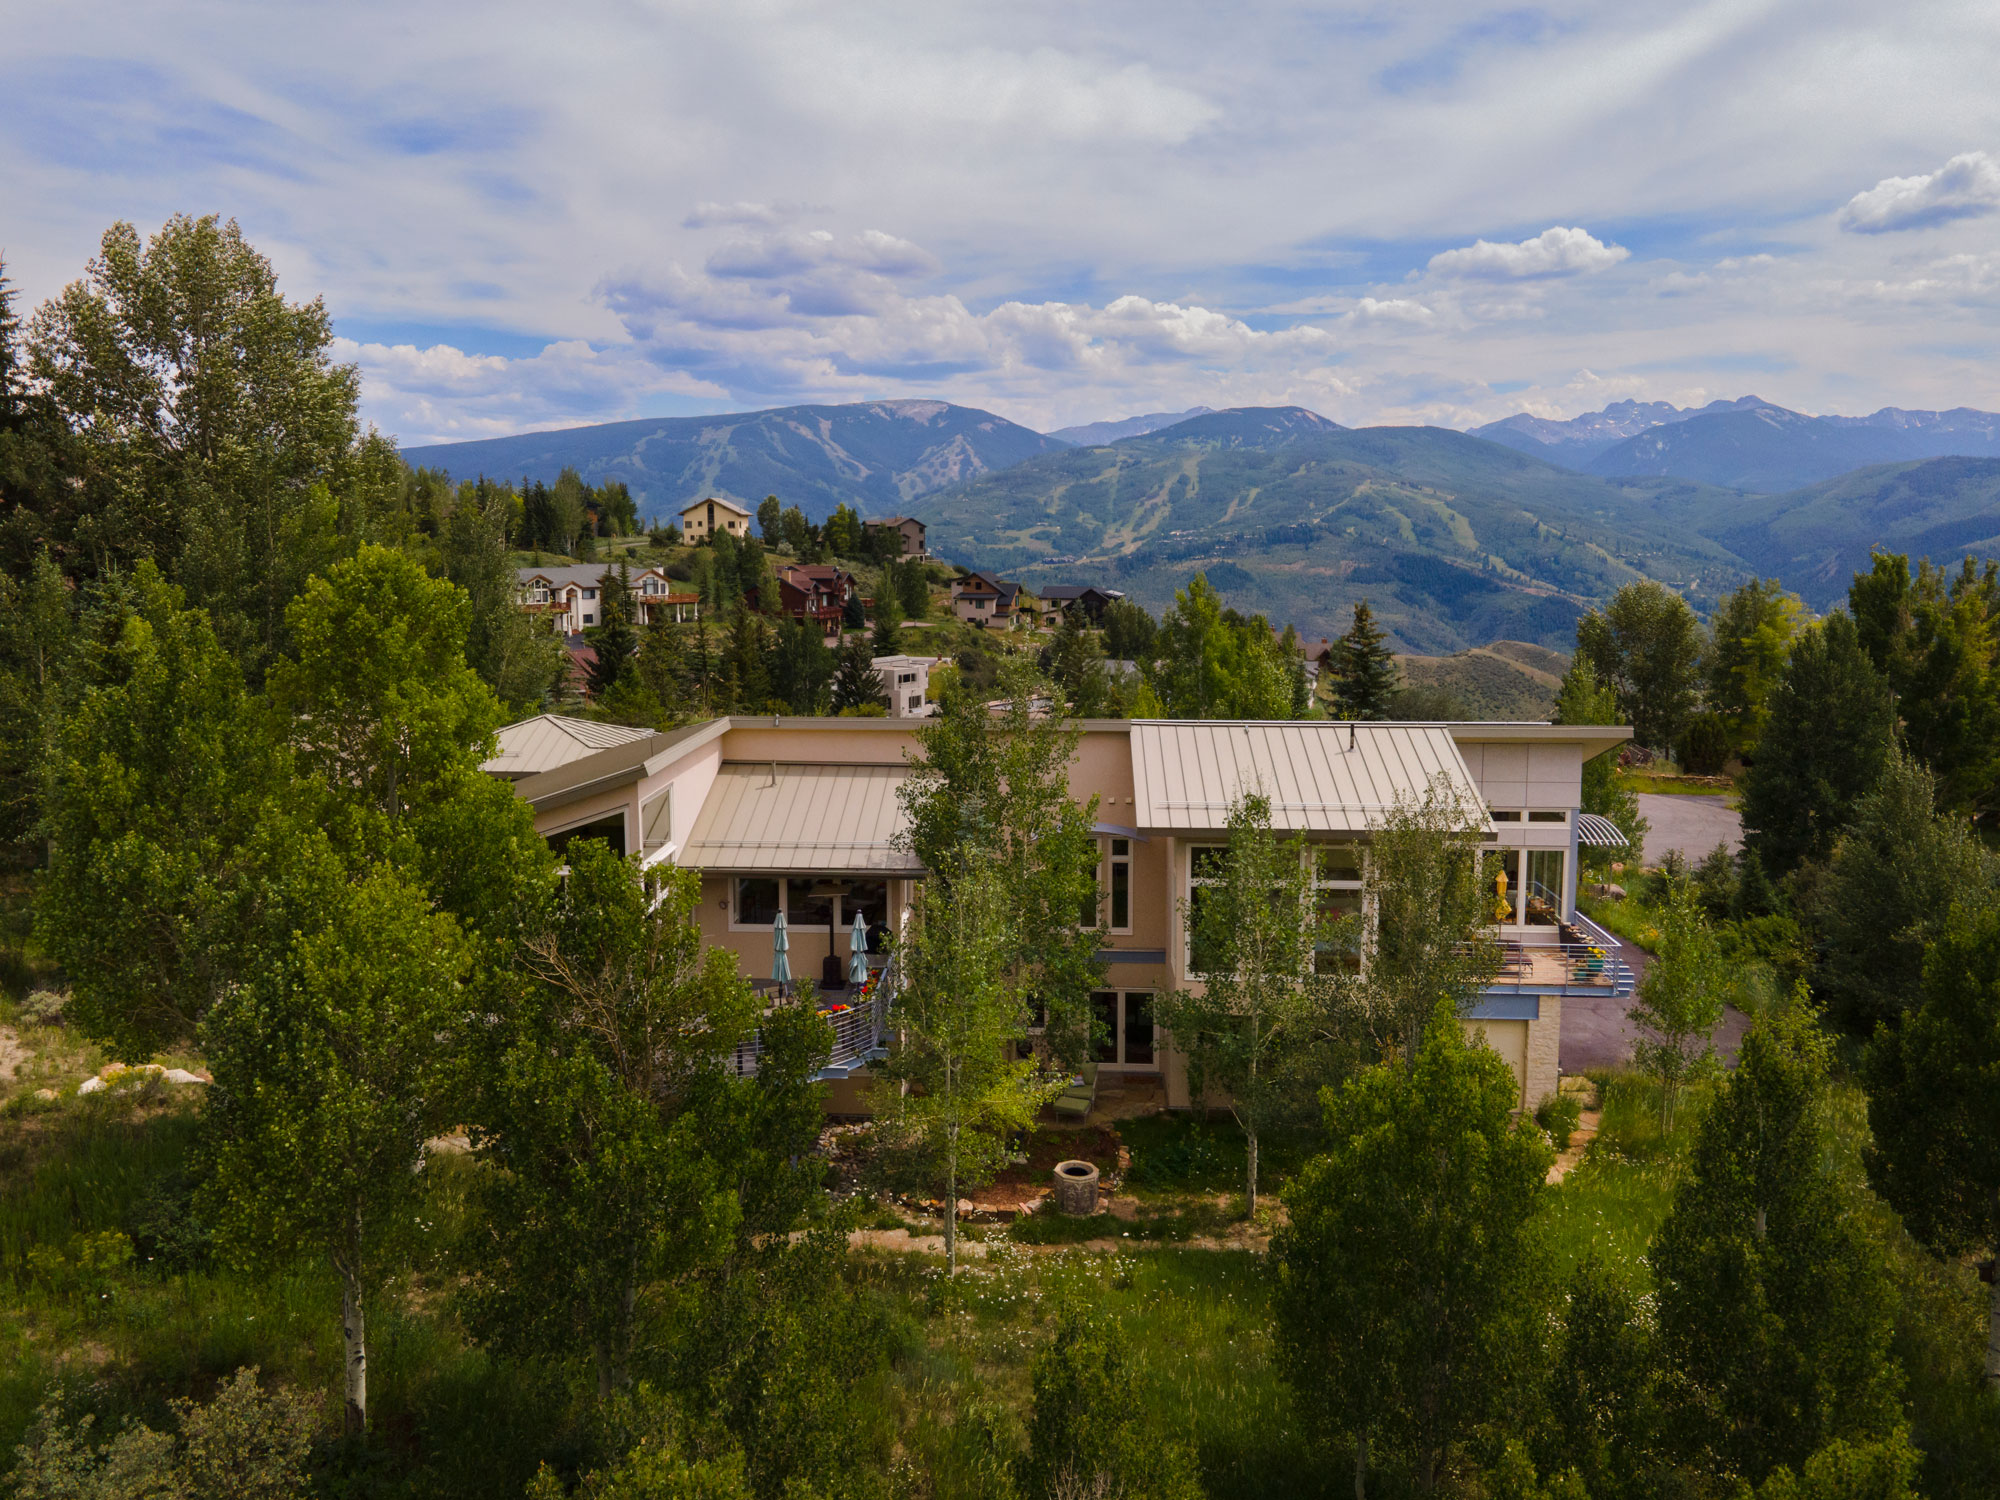 Featured Property: A Beautiful Sanctuary With Astonishing Views In Avon, Co